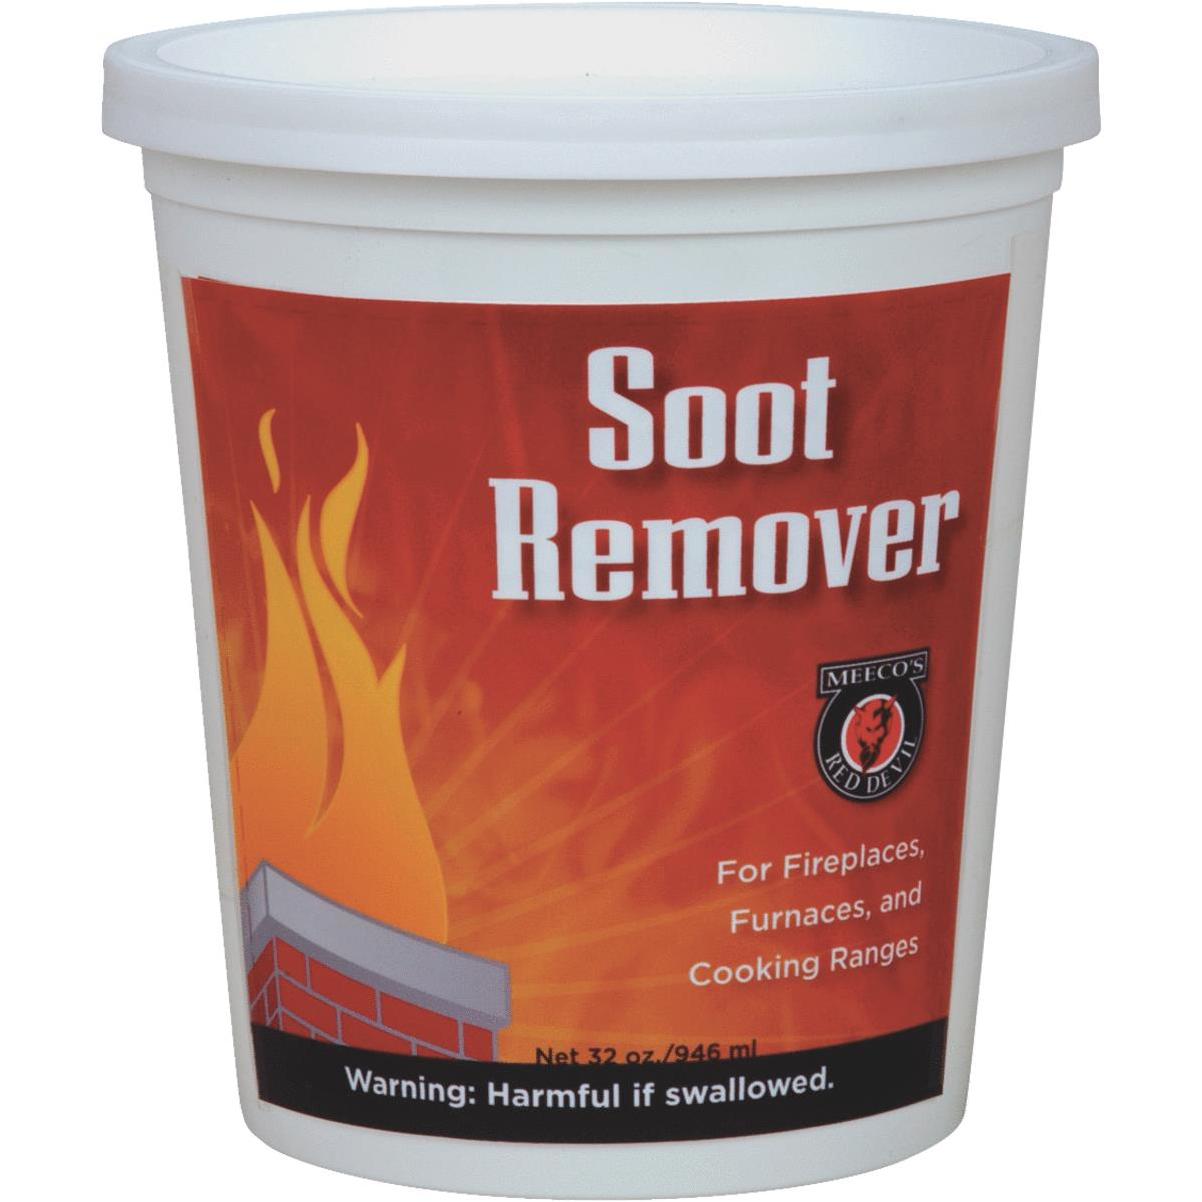 SOOT REMOVER